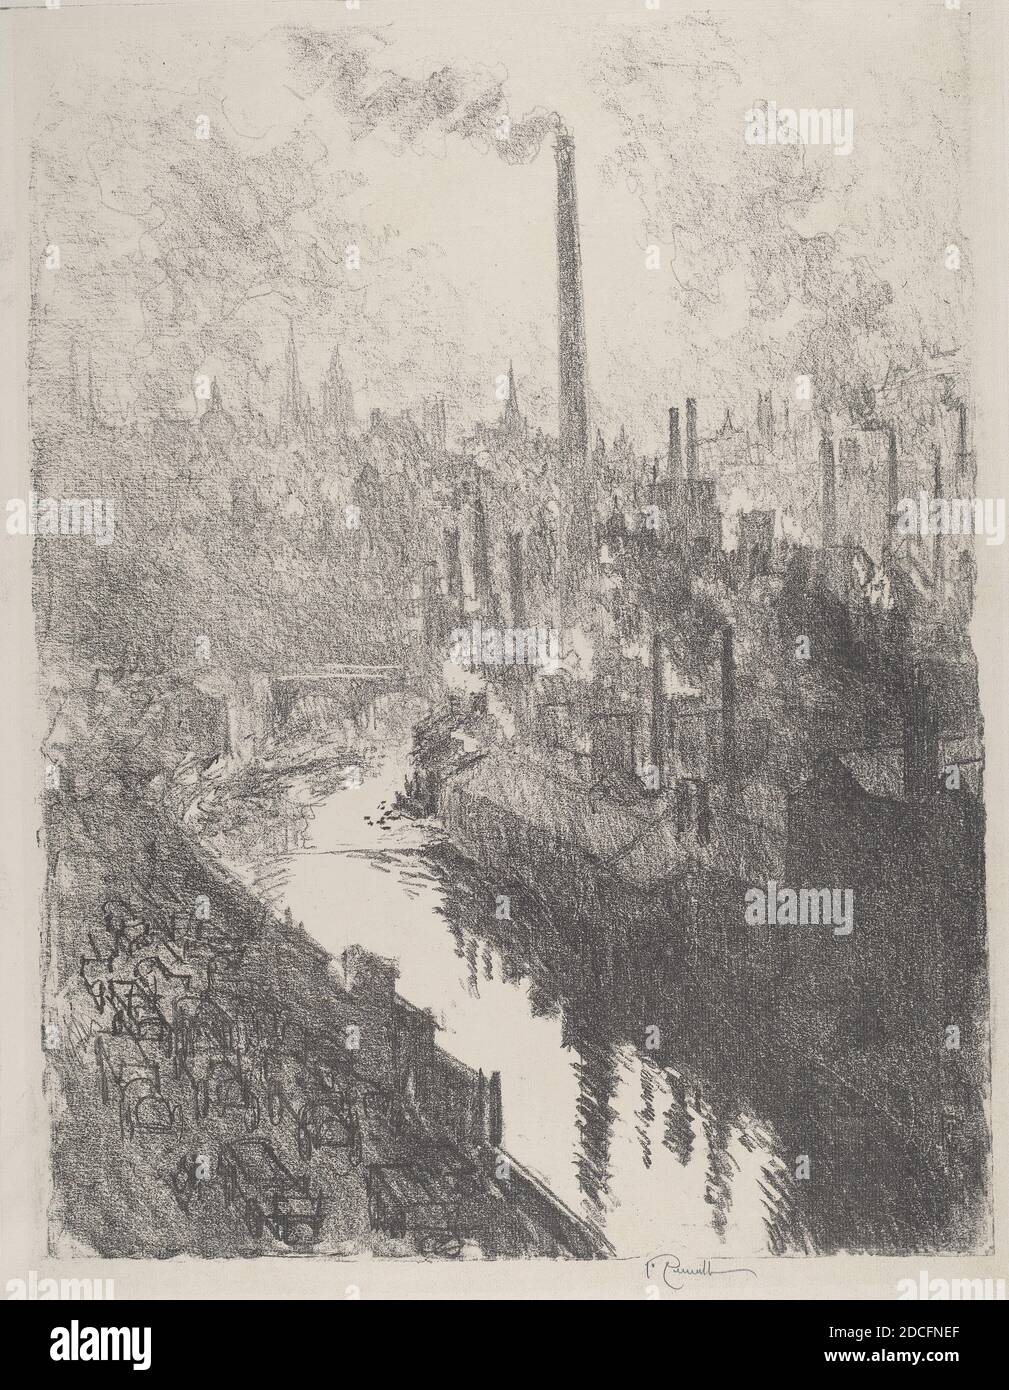 Joseph Pennell, (artiste), américain, 1857 - 1926, The Great Chimney, The Motor Park, English War Work, (série), 1916, lithographie Banque D'Images